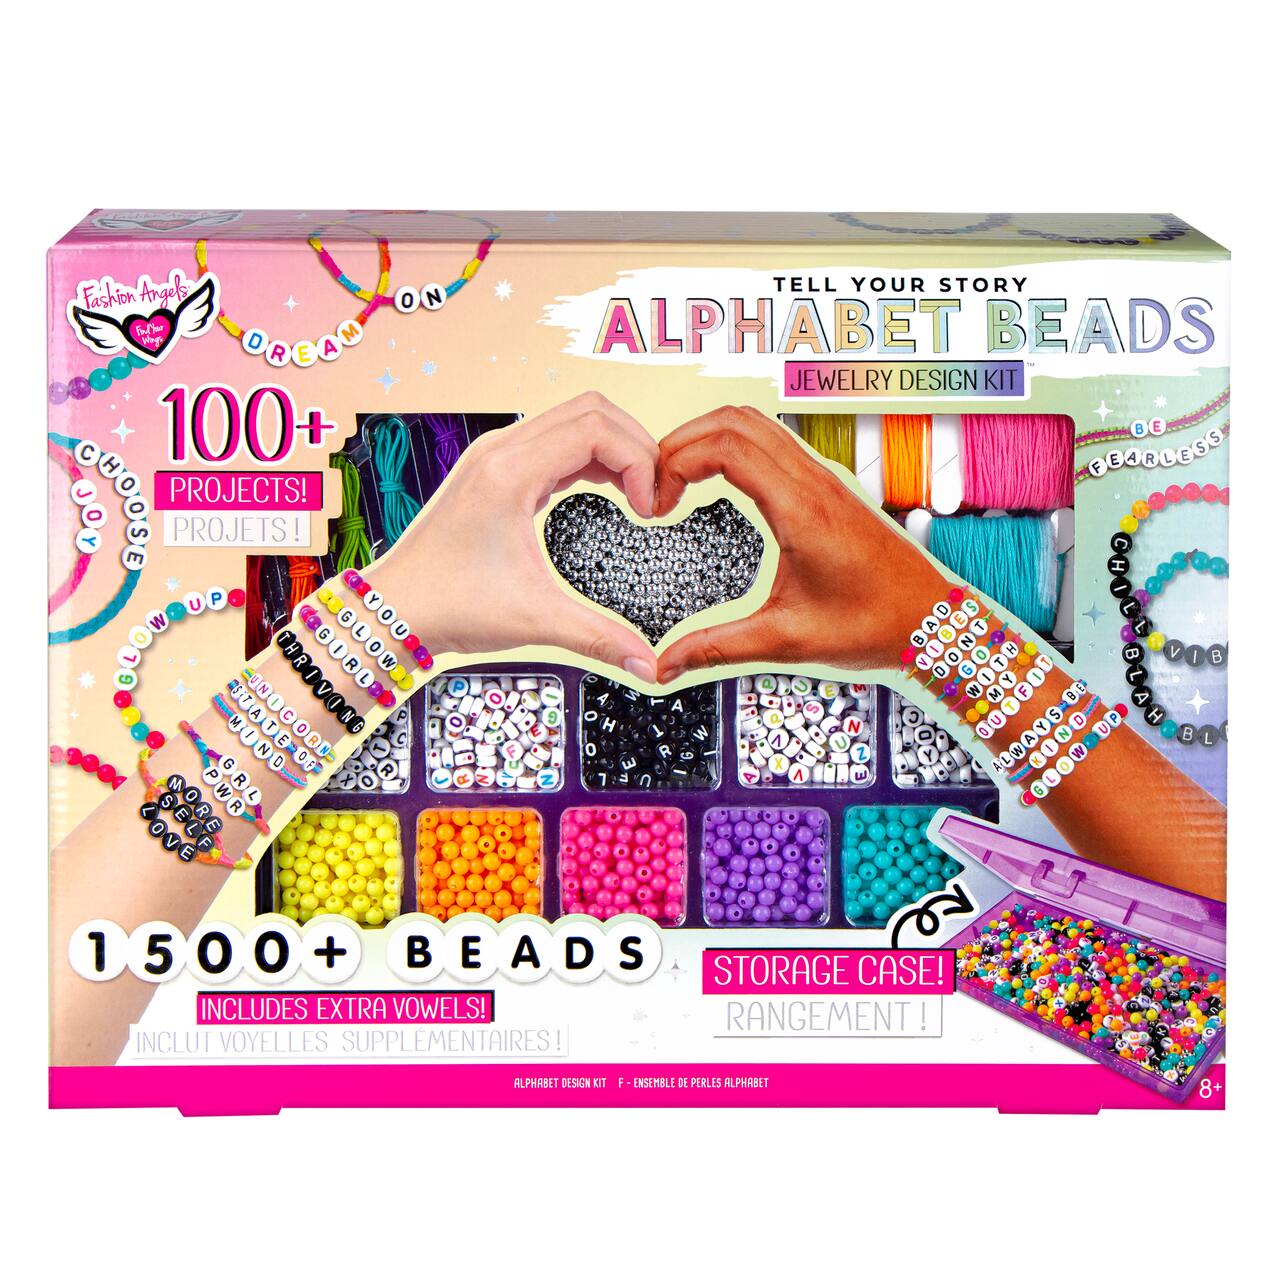 6 Pack: Fashion Angels® Tell Your Story Alphabet Beads Jewelry Design Kit™